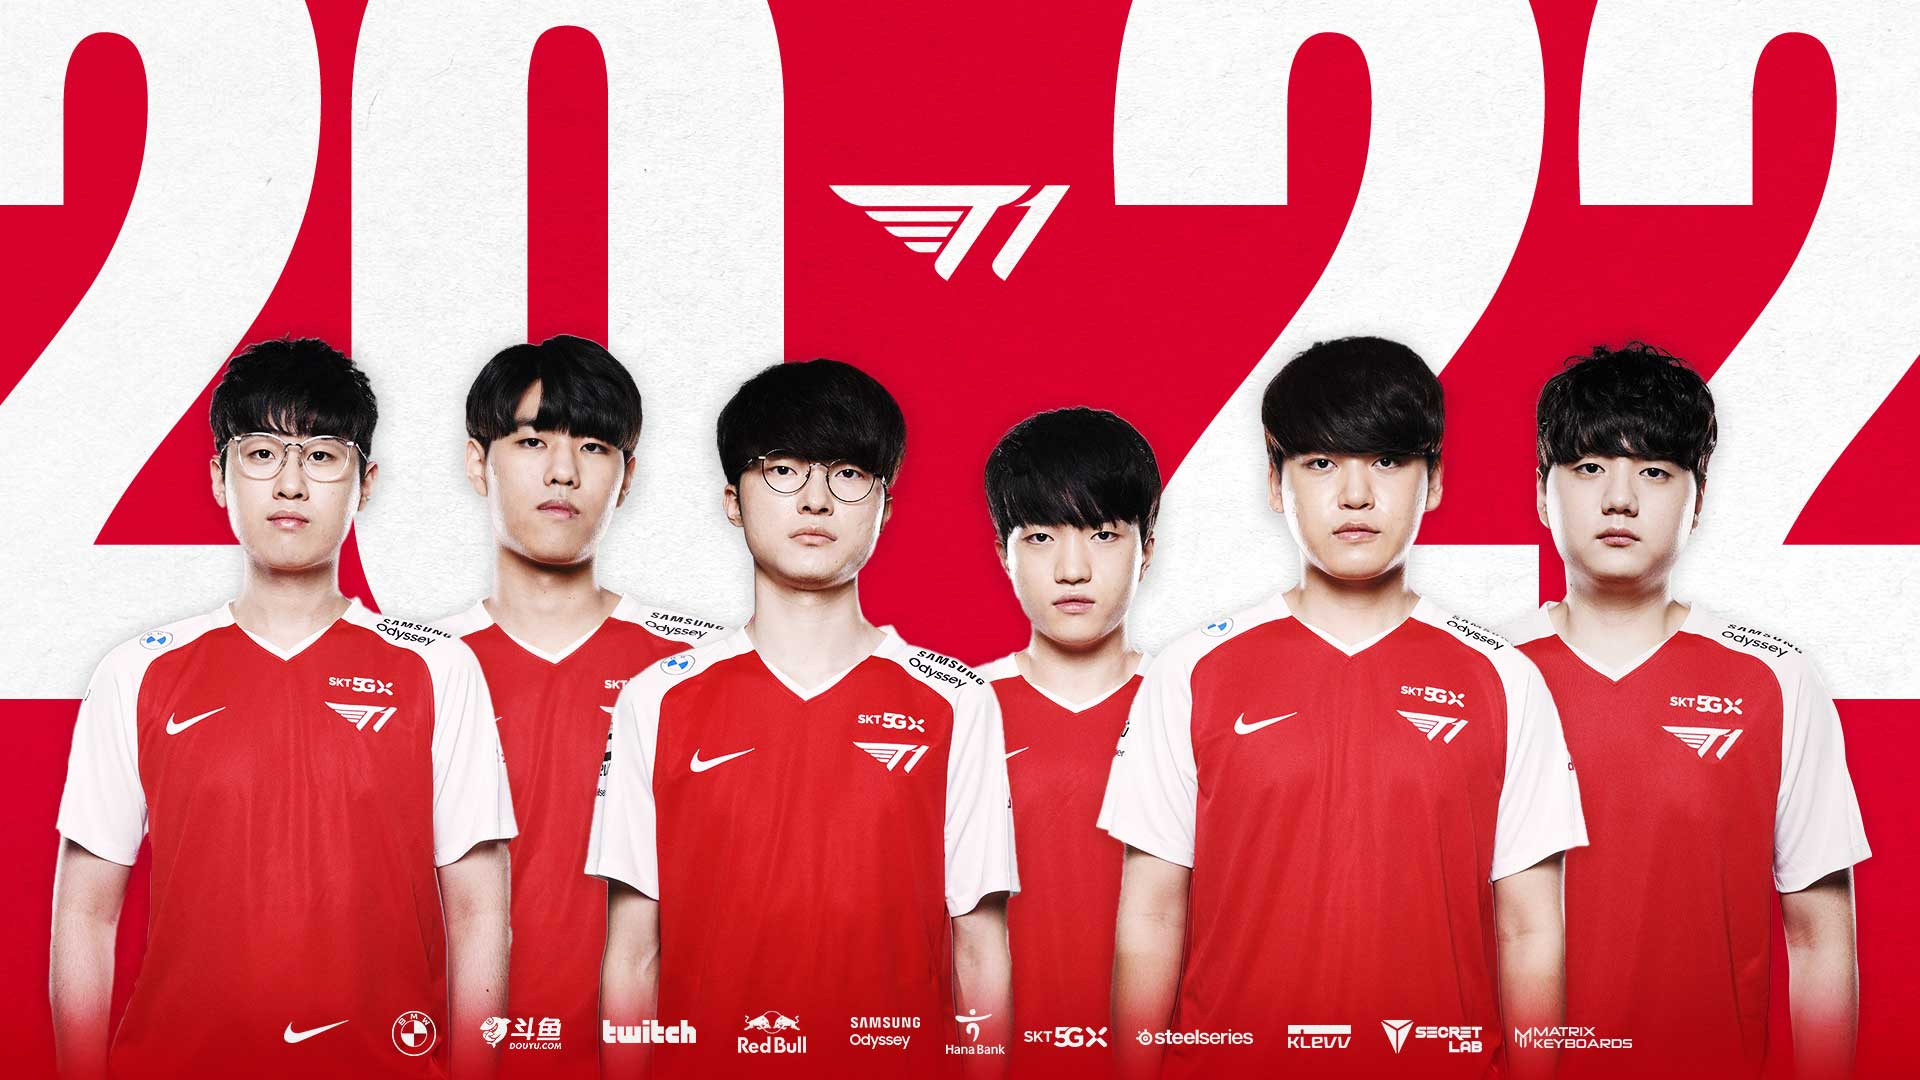 After the LCK finals, several T1 players, including Faker, tested